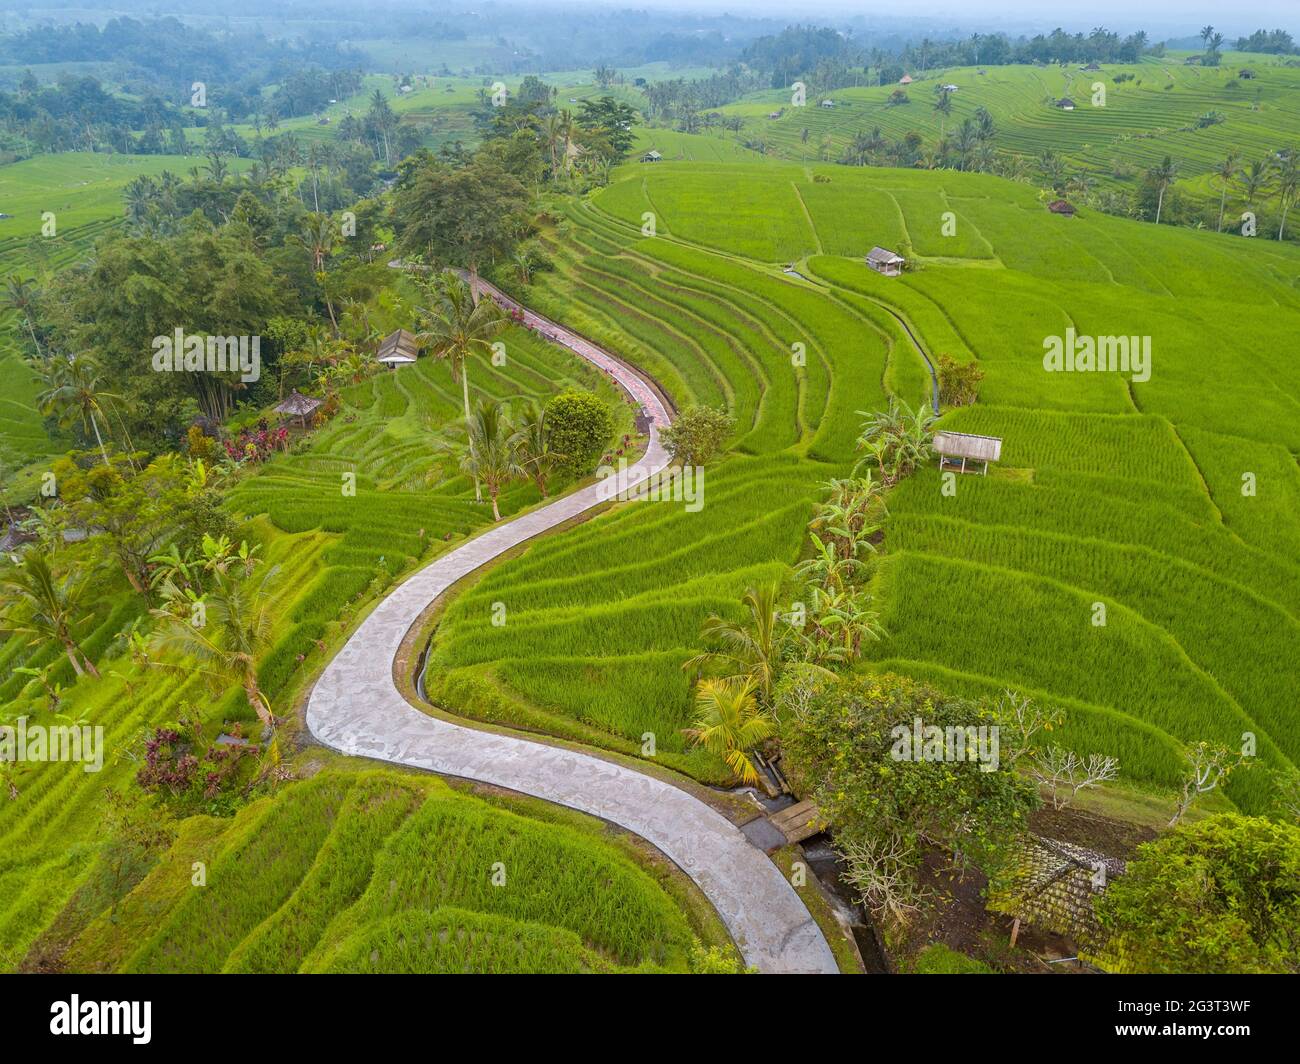 Rice Fields and Winding Path. Aerial View Stock Photo